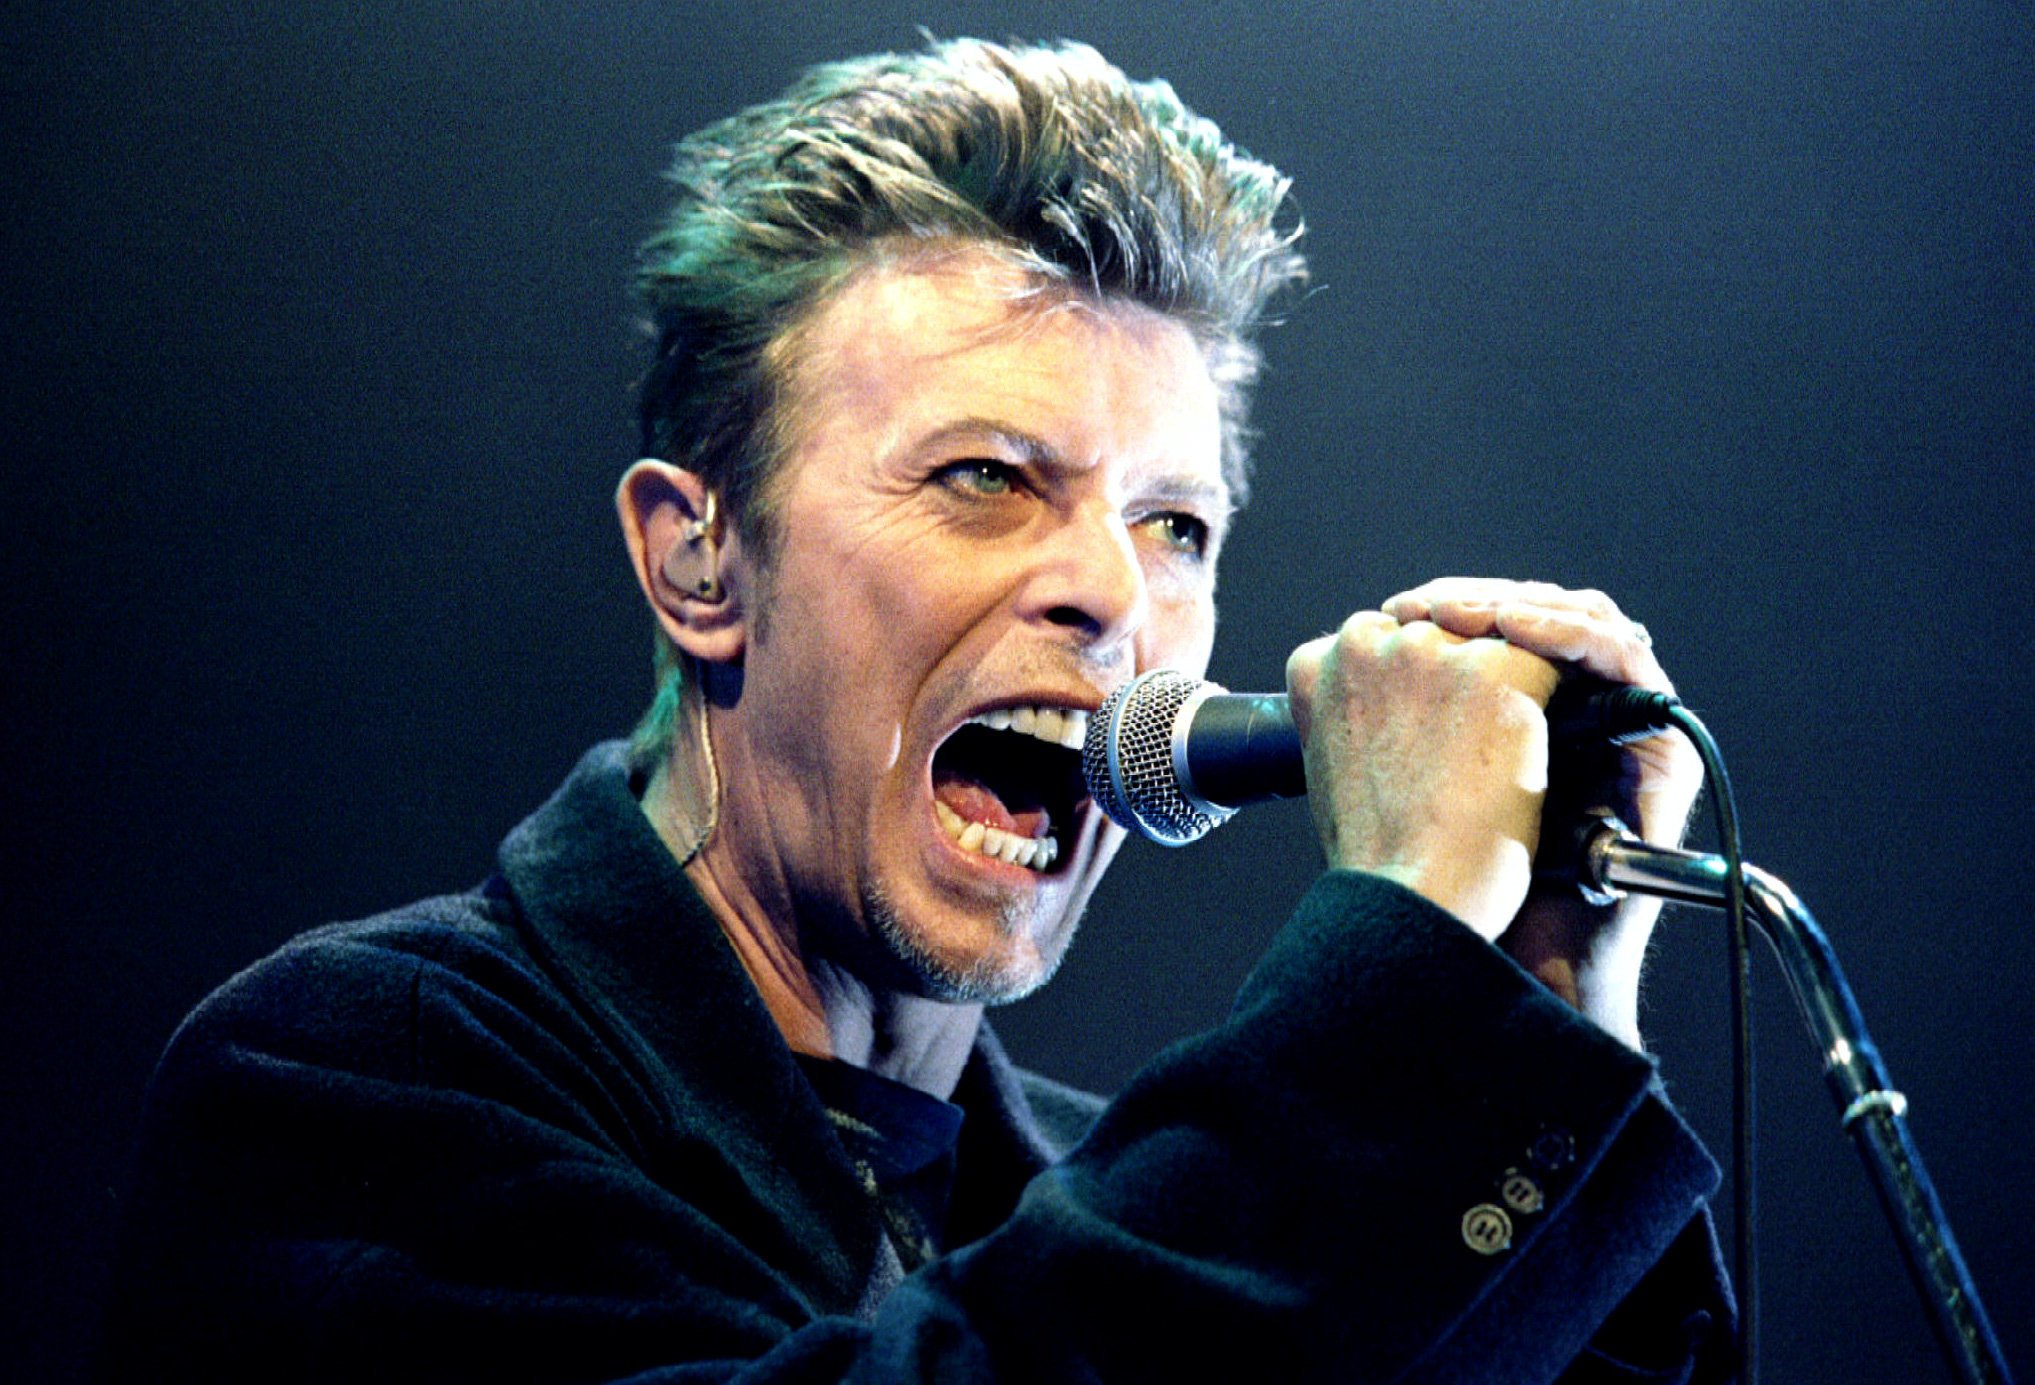 David Bowie performs during a concert in Vienna, Austria in this February 4, 1996 file photo. David Bowie marked his 69th birthday on January 8, 2016 with the release of a new album, "Blackstar", with critics giving the thumbs up to the latest work in a long and innovative career. REUTERS/Leonhard Foeger/Files